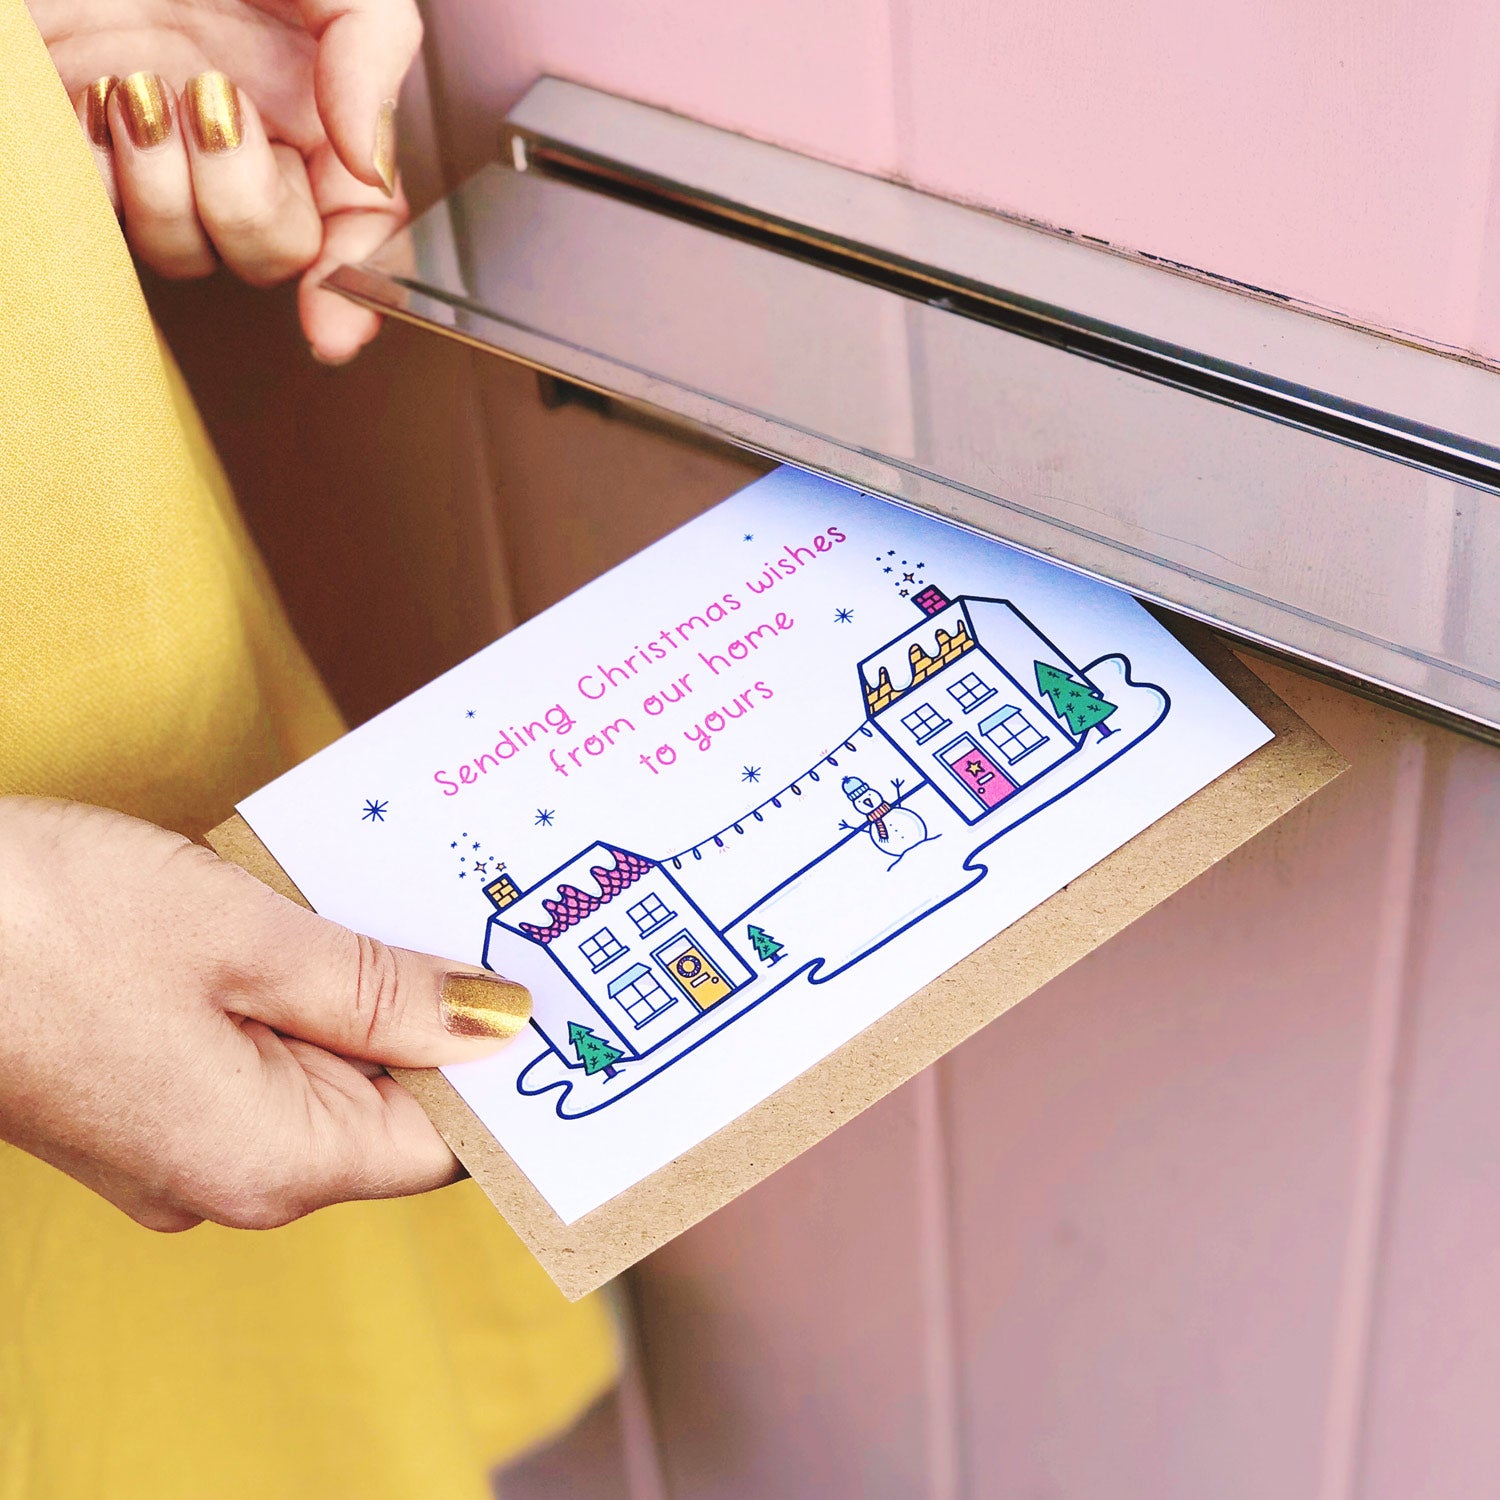 Joanne is pushing the Christmas wishes card featuring houses, snow and a snowman through the letter box of a pink door and wearing a yellow skirt.